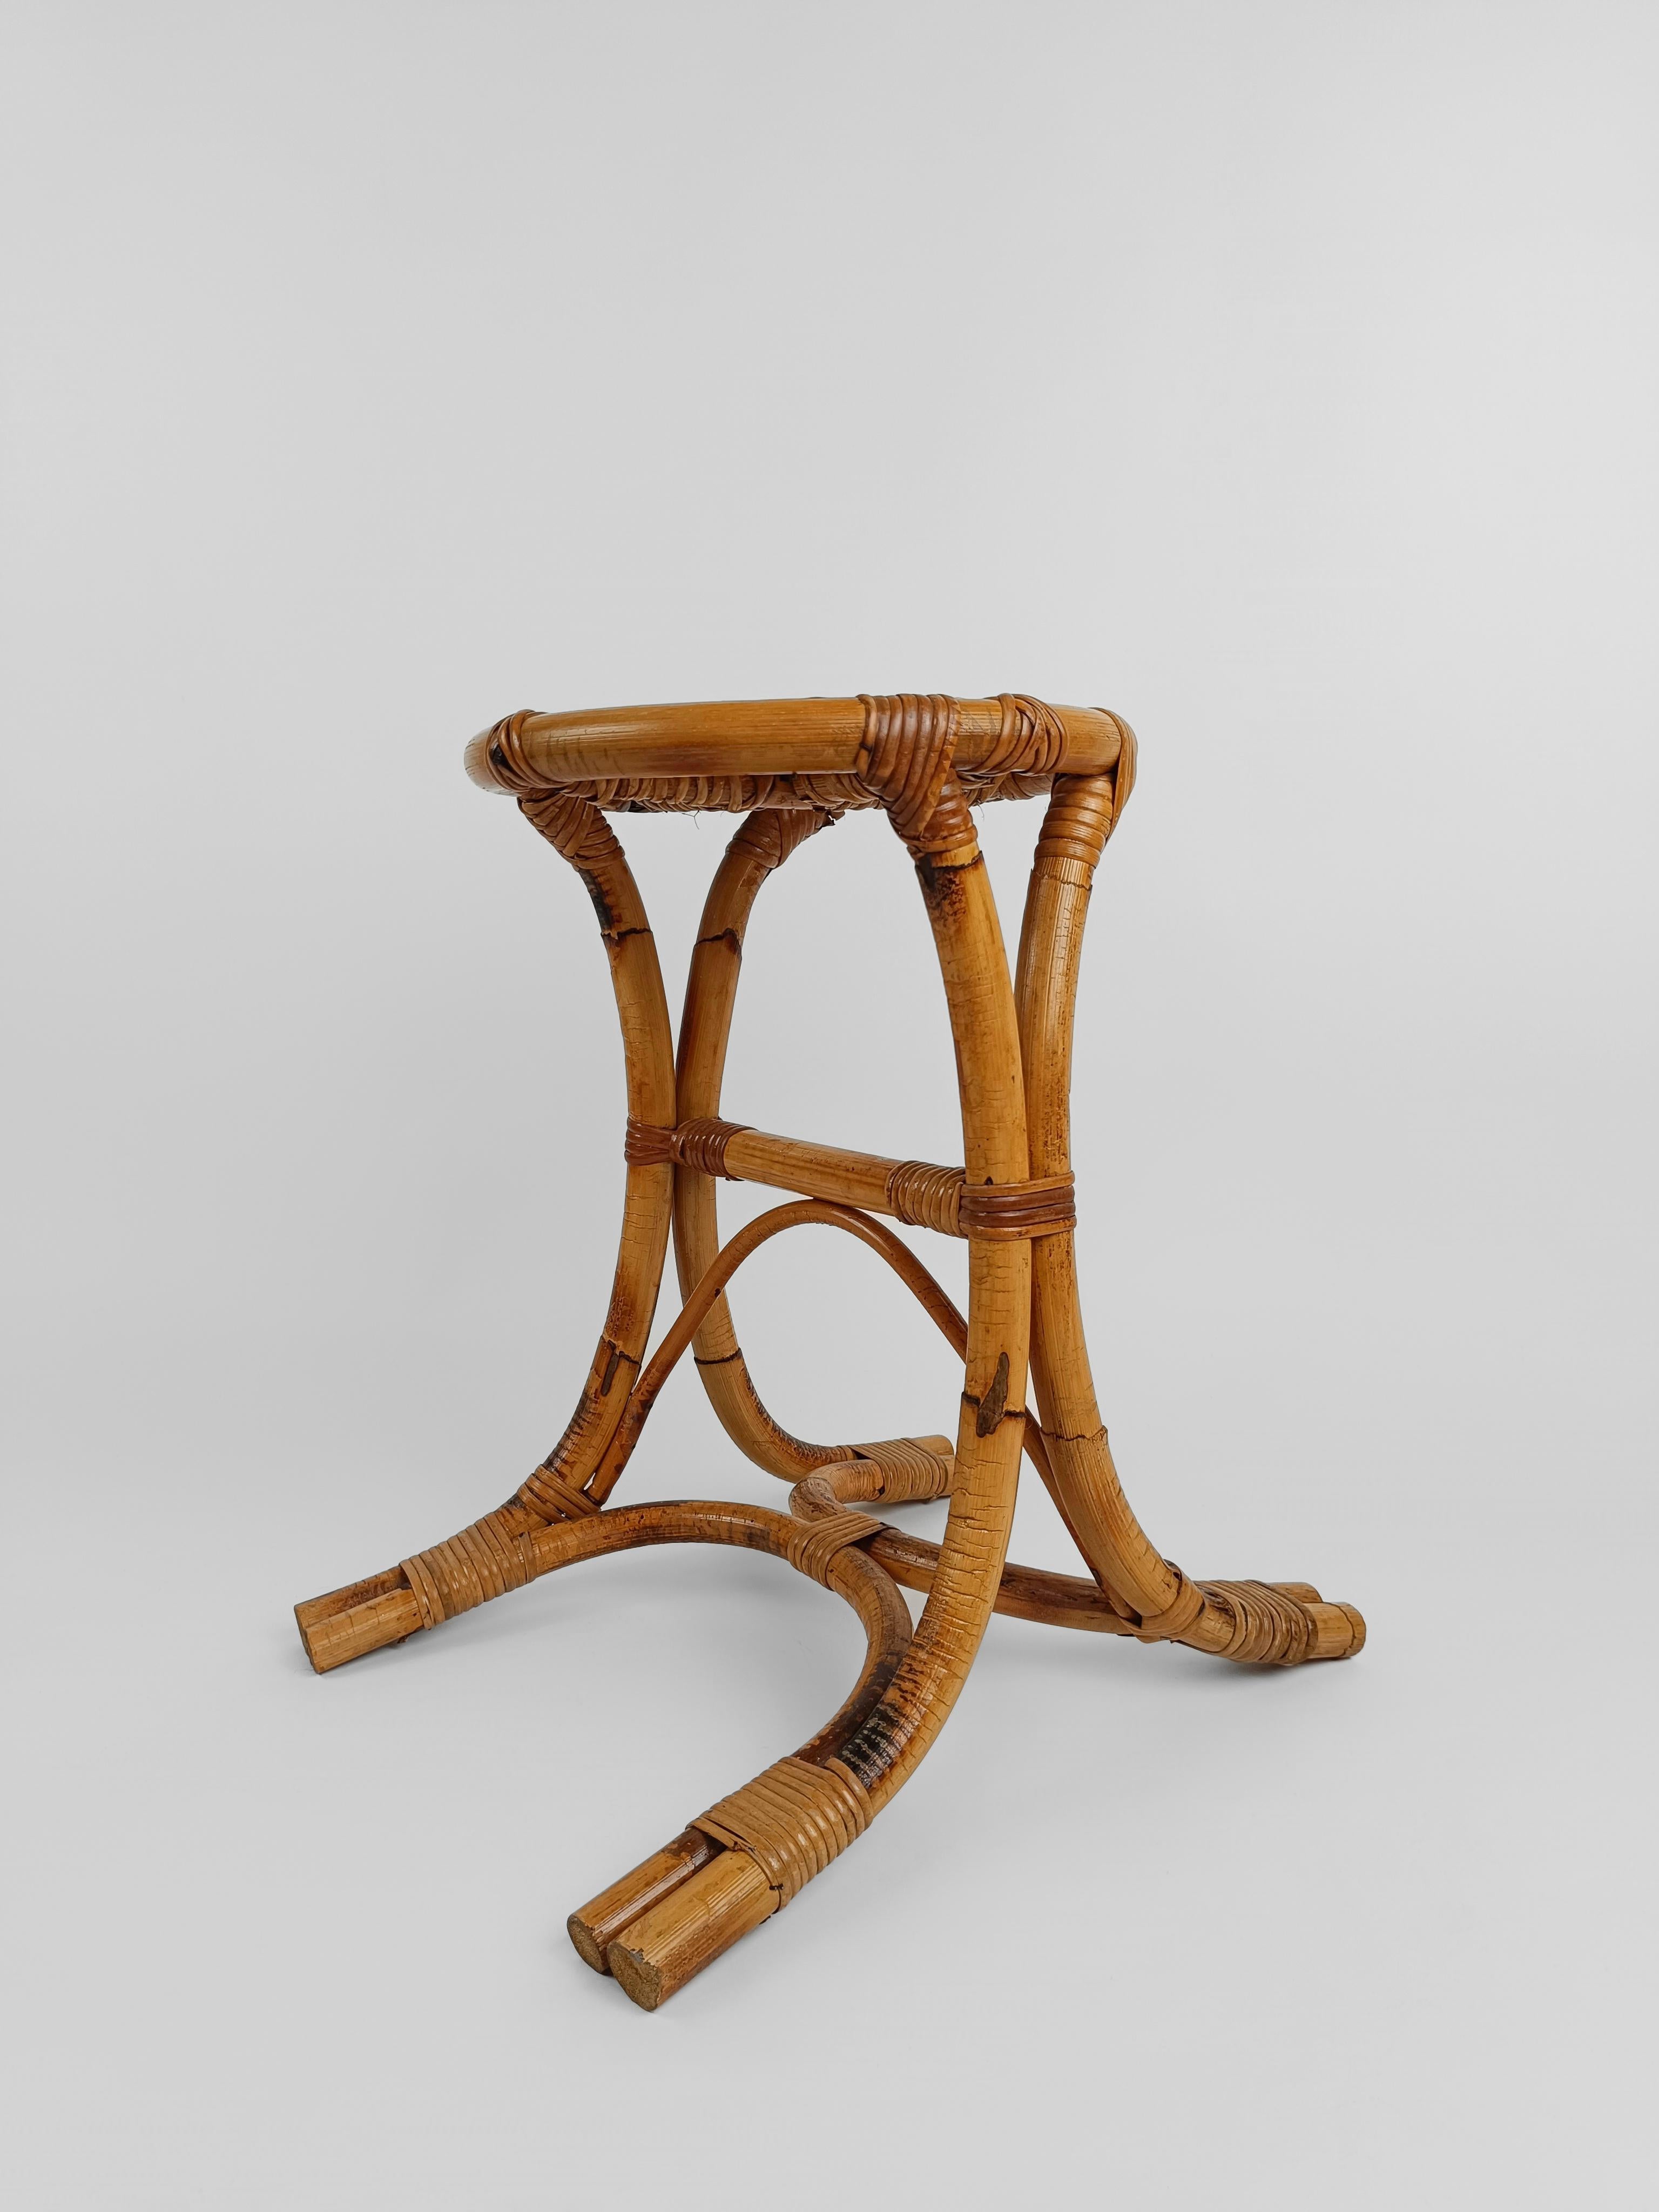 Italian Mid-Century Modern Bamboo Rattan and Cane Stool, 1960s  For Sale 5